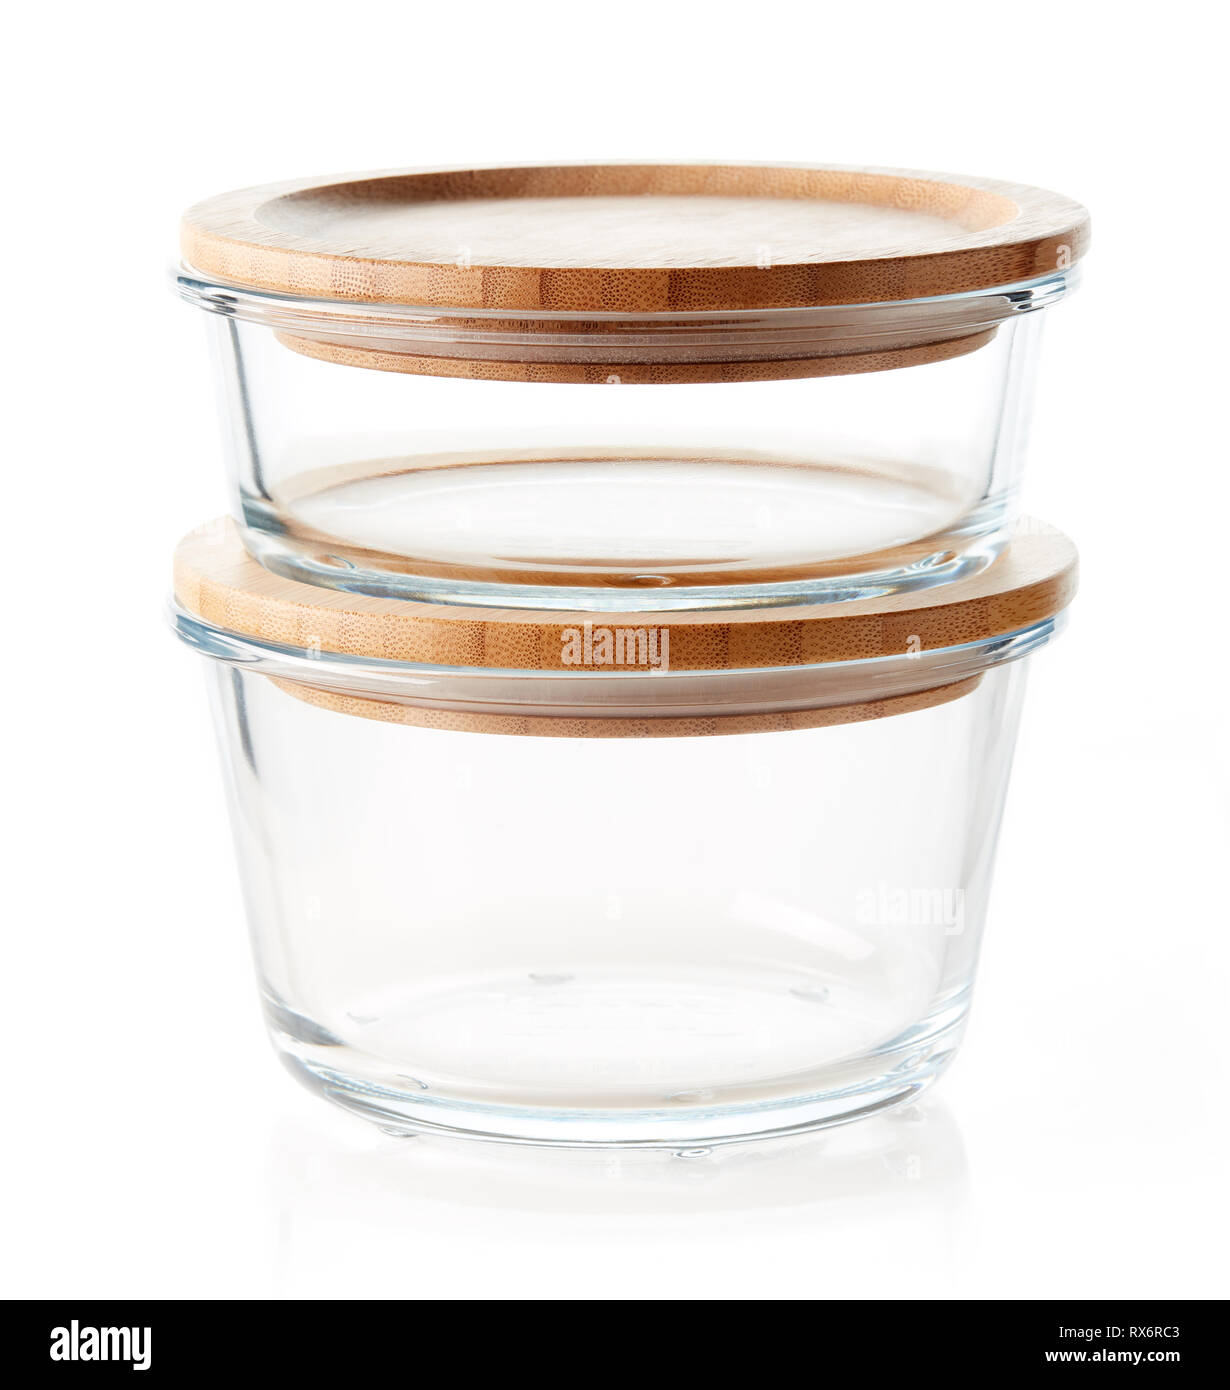 https://c8.alamy.com/comp/RX6RC3/glass-food-containers-with-wooden-lid-isolated-on-white-background-RX6RC3.jpg